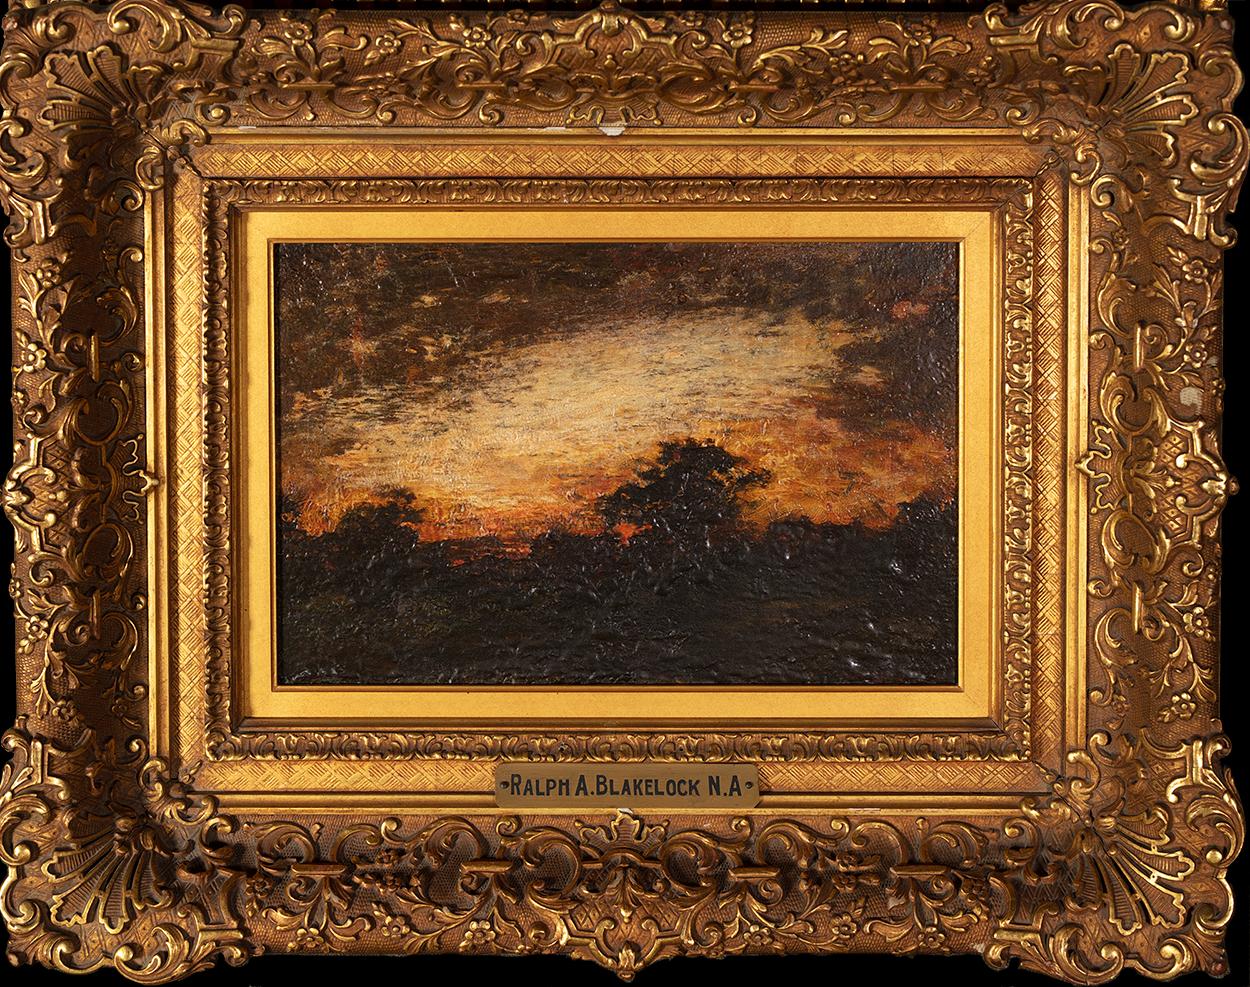 Landscape Silhouette at Twilight - Painting by Ralph Albert Blakelock